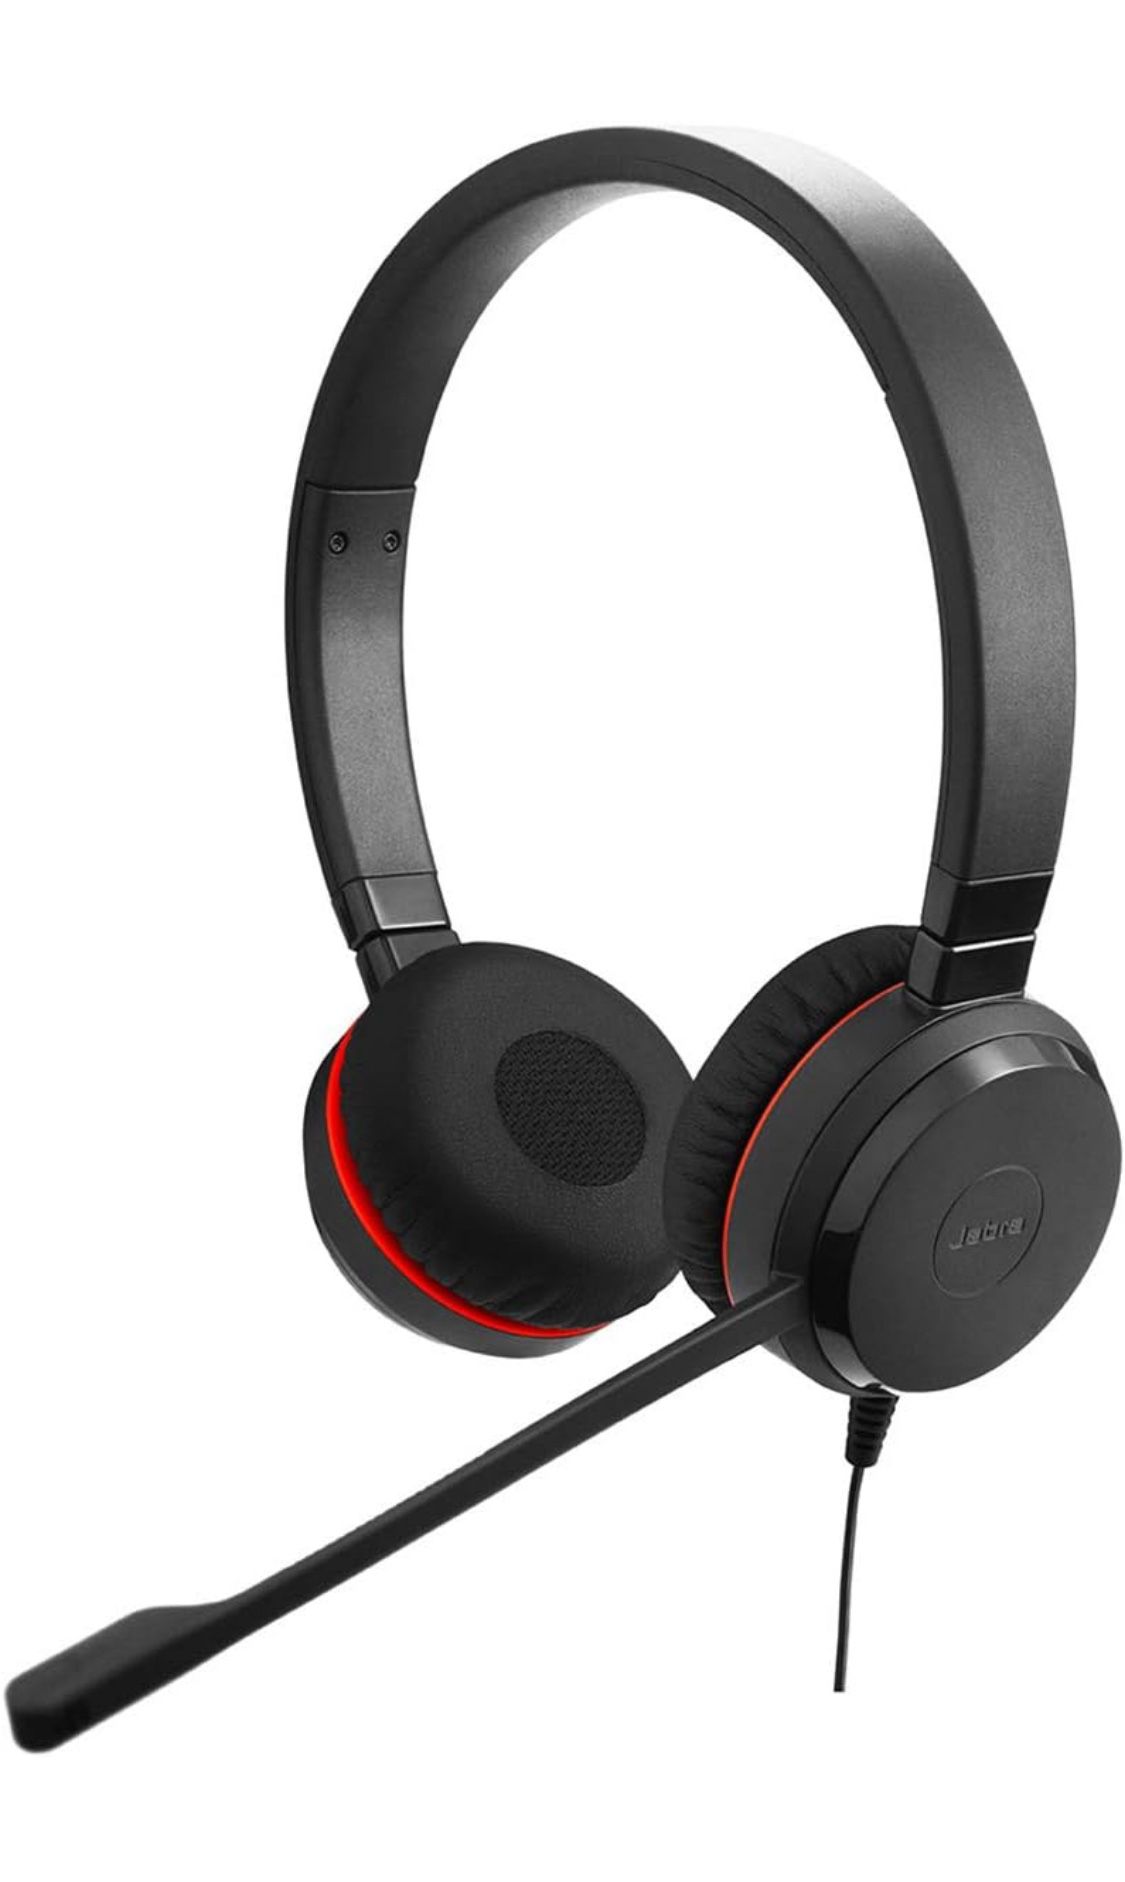 Jabra Evolve 30 II Wired Headset, Stereo, UC-Optimized – Telephone Headset with Superior Sound for Calls and Music – 3.5mm Jack/USB Connection – Pro H